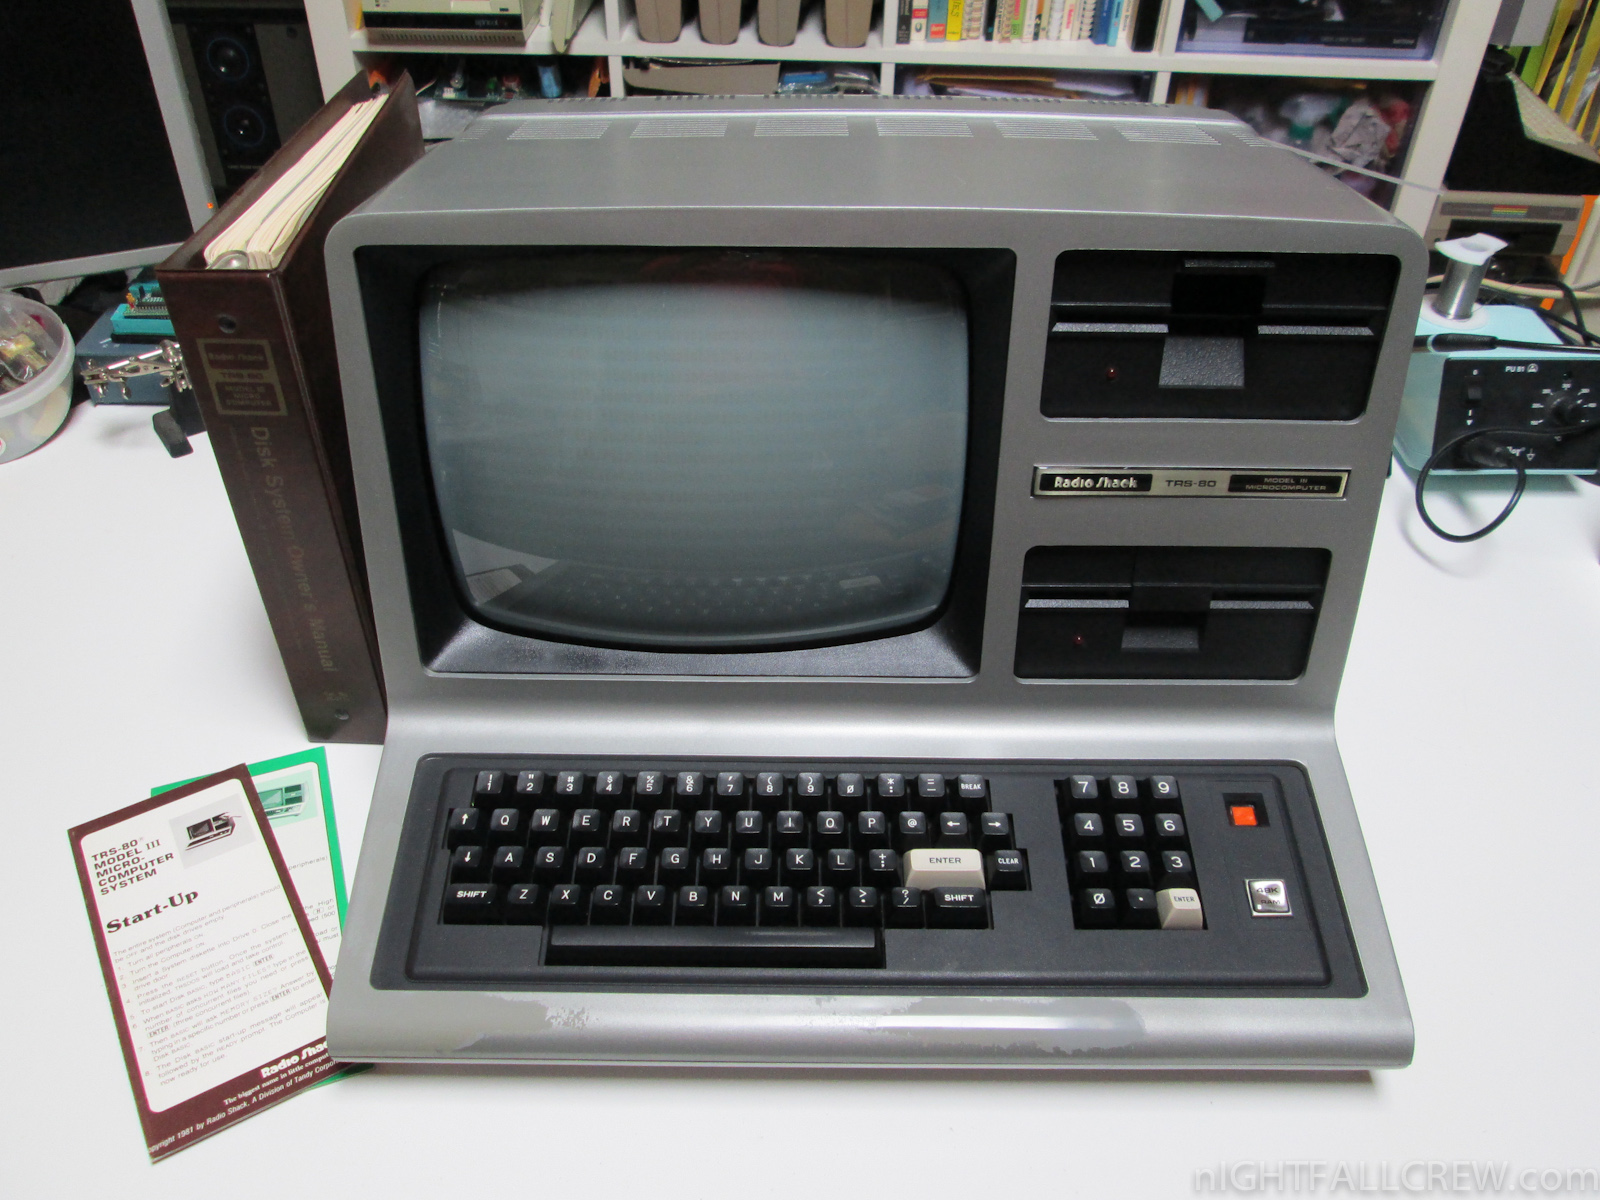 TRS-80 | IS301.com